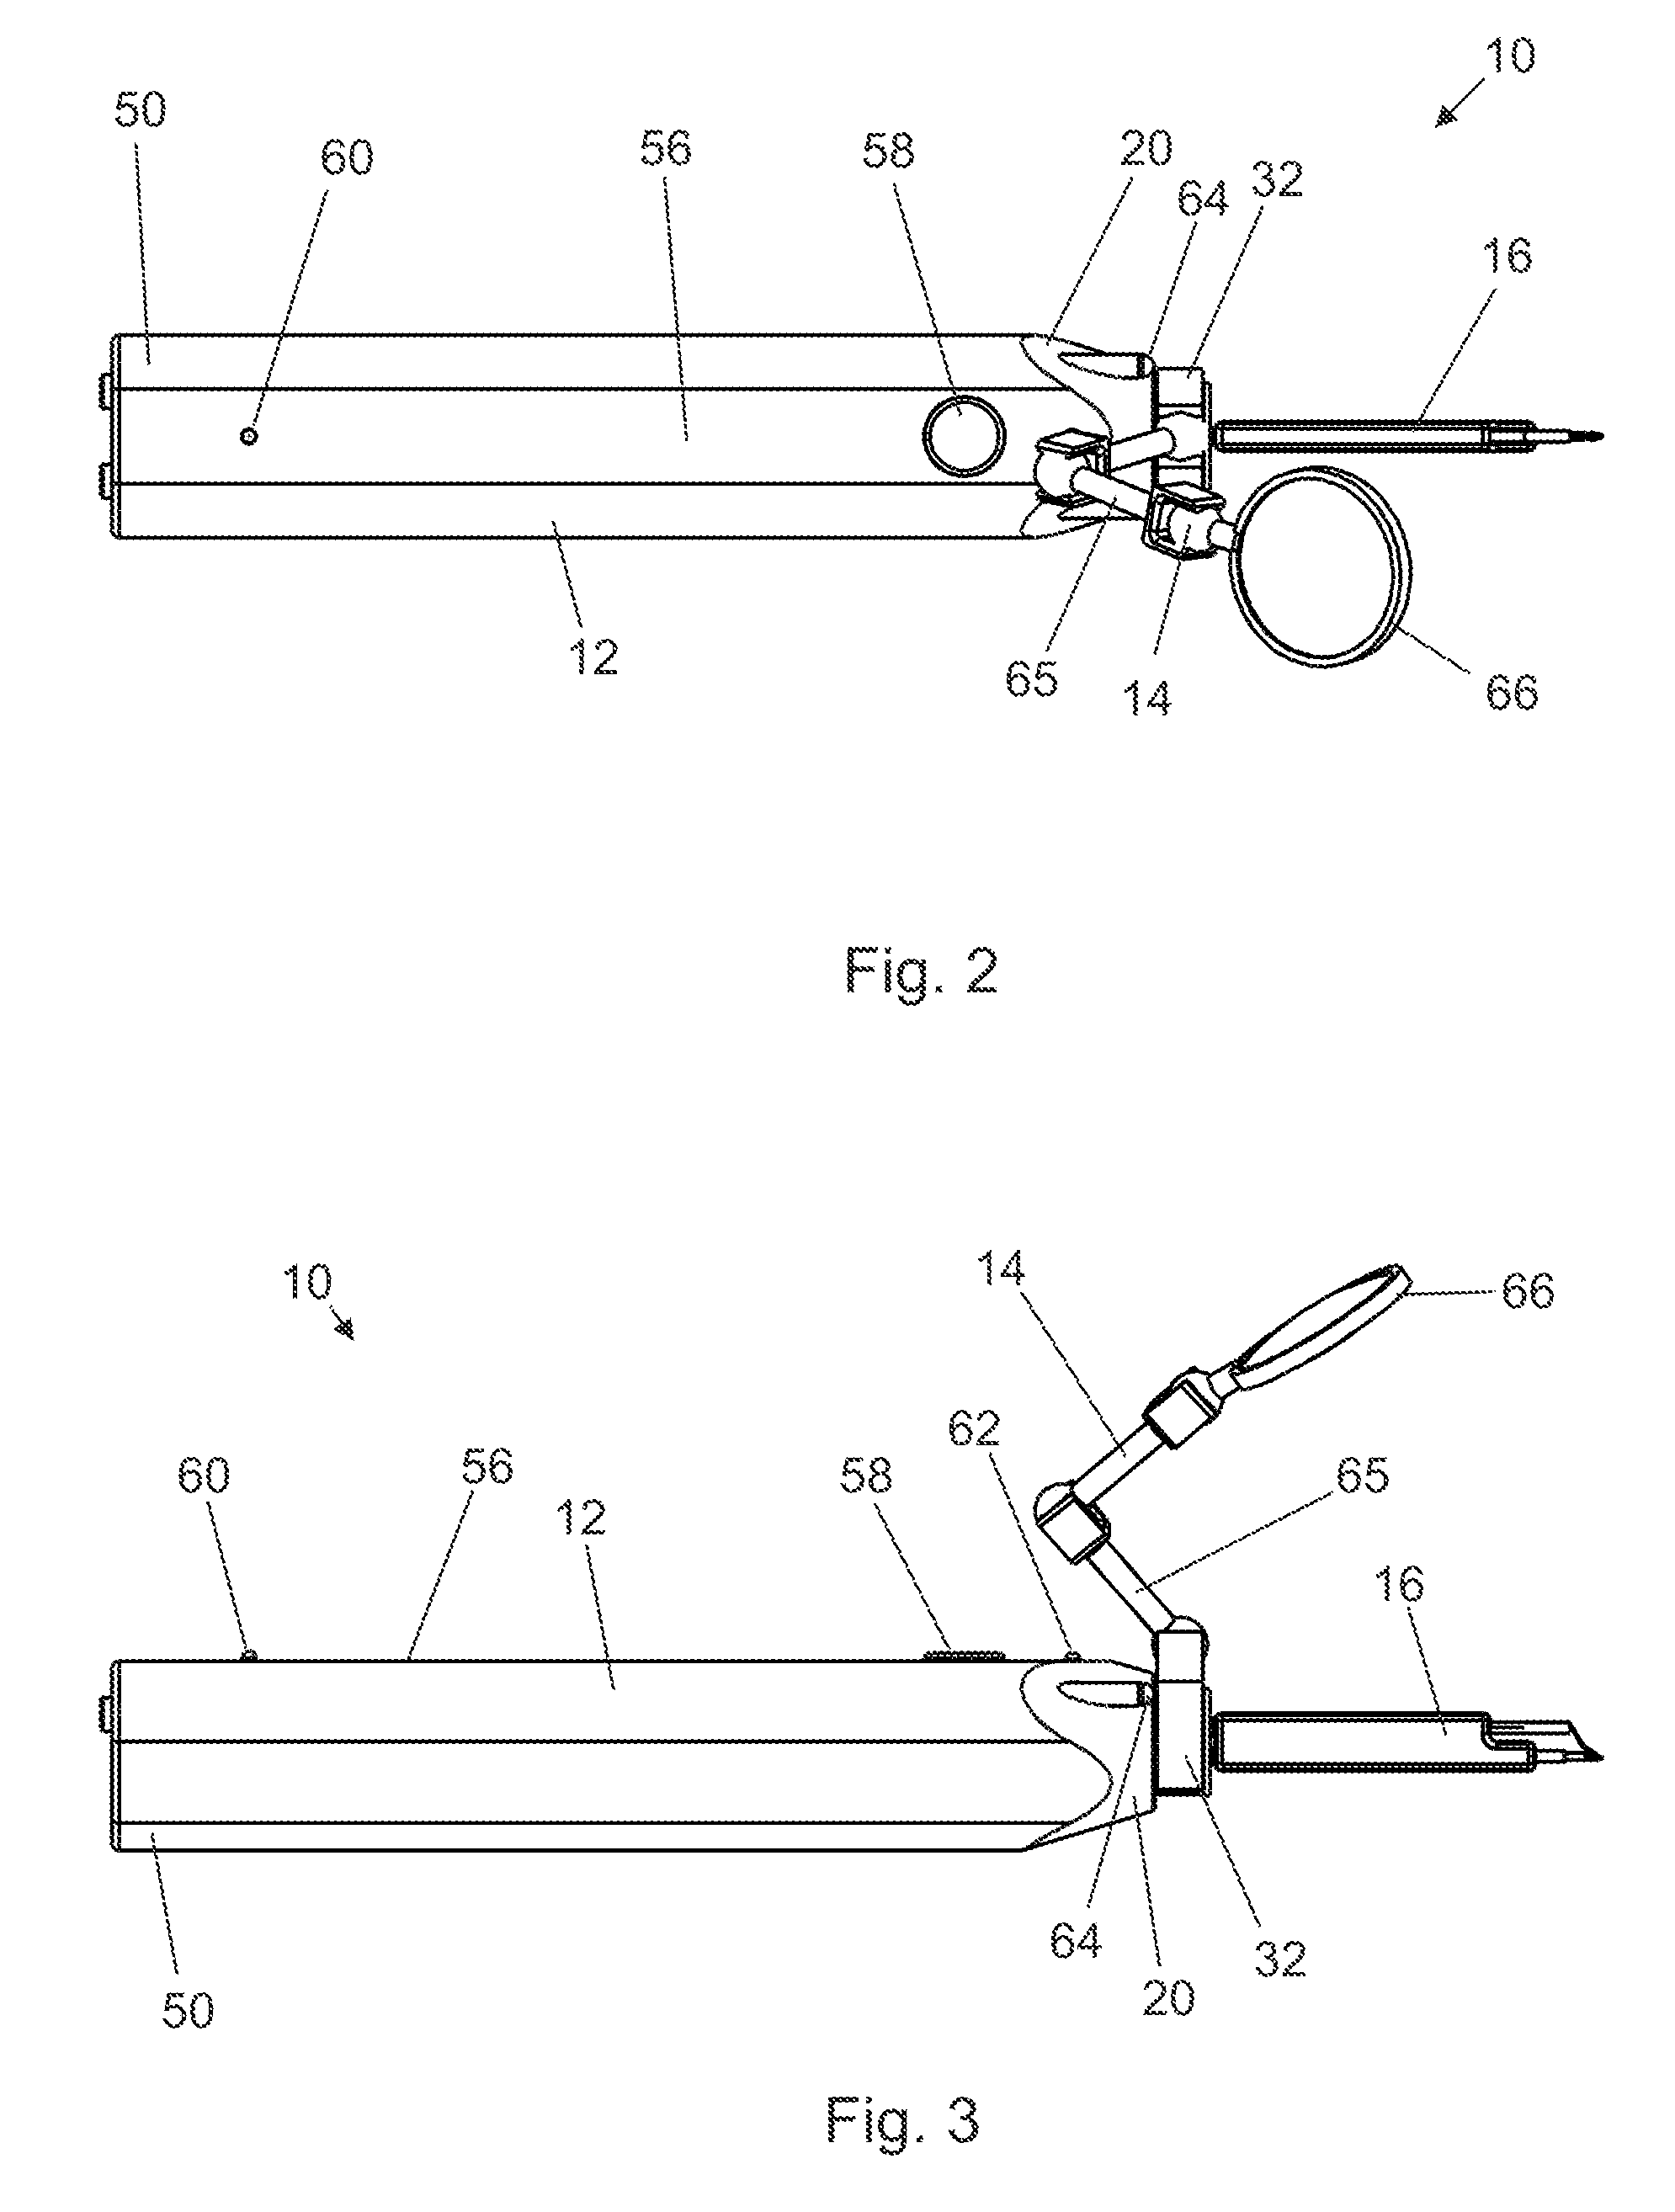 Method, apparatus, and kit for thermal suture cutting